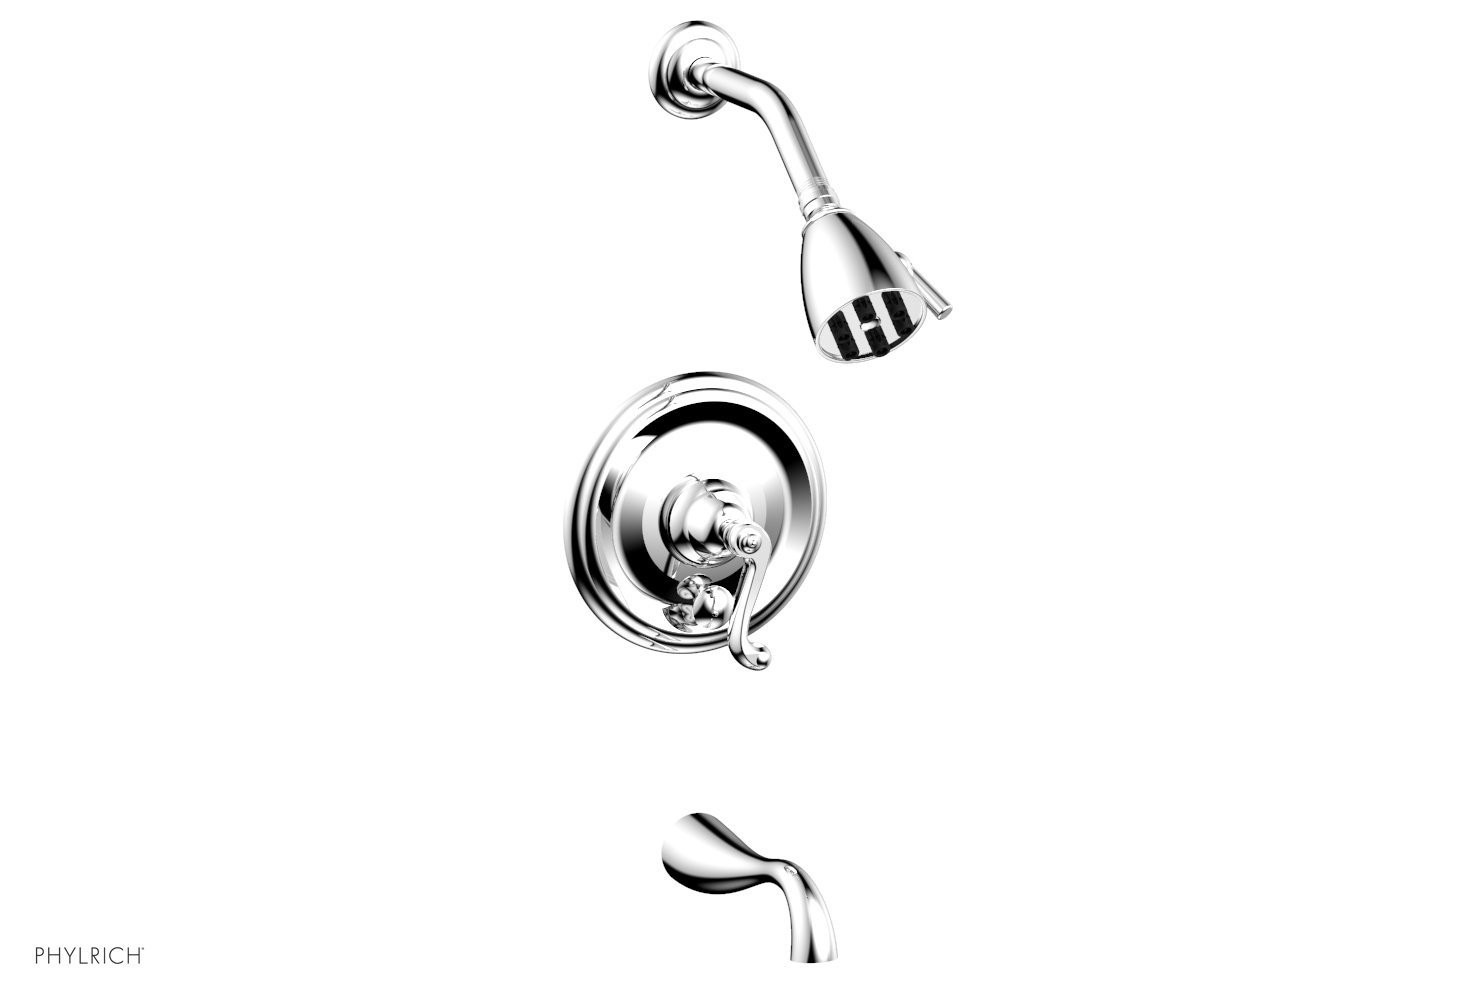 PHYLRICH DPB2102 REVERE & SAVANNAH WALL MOUNT PRESSURE BALANCE TUB AND SHOWER SET WITH CURVED LEVER HANDLE